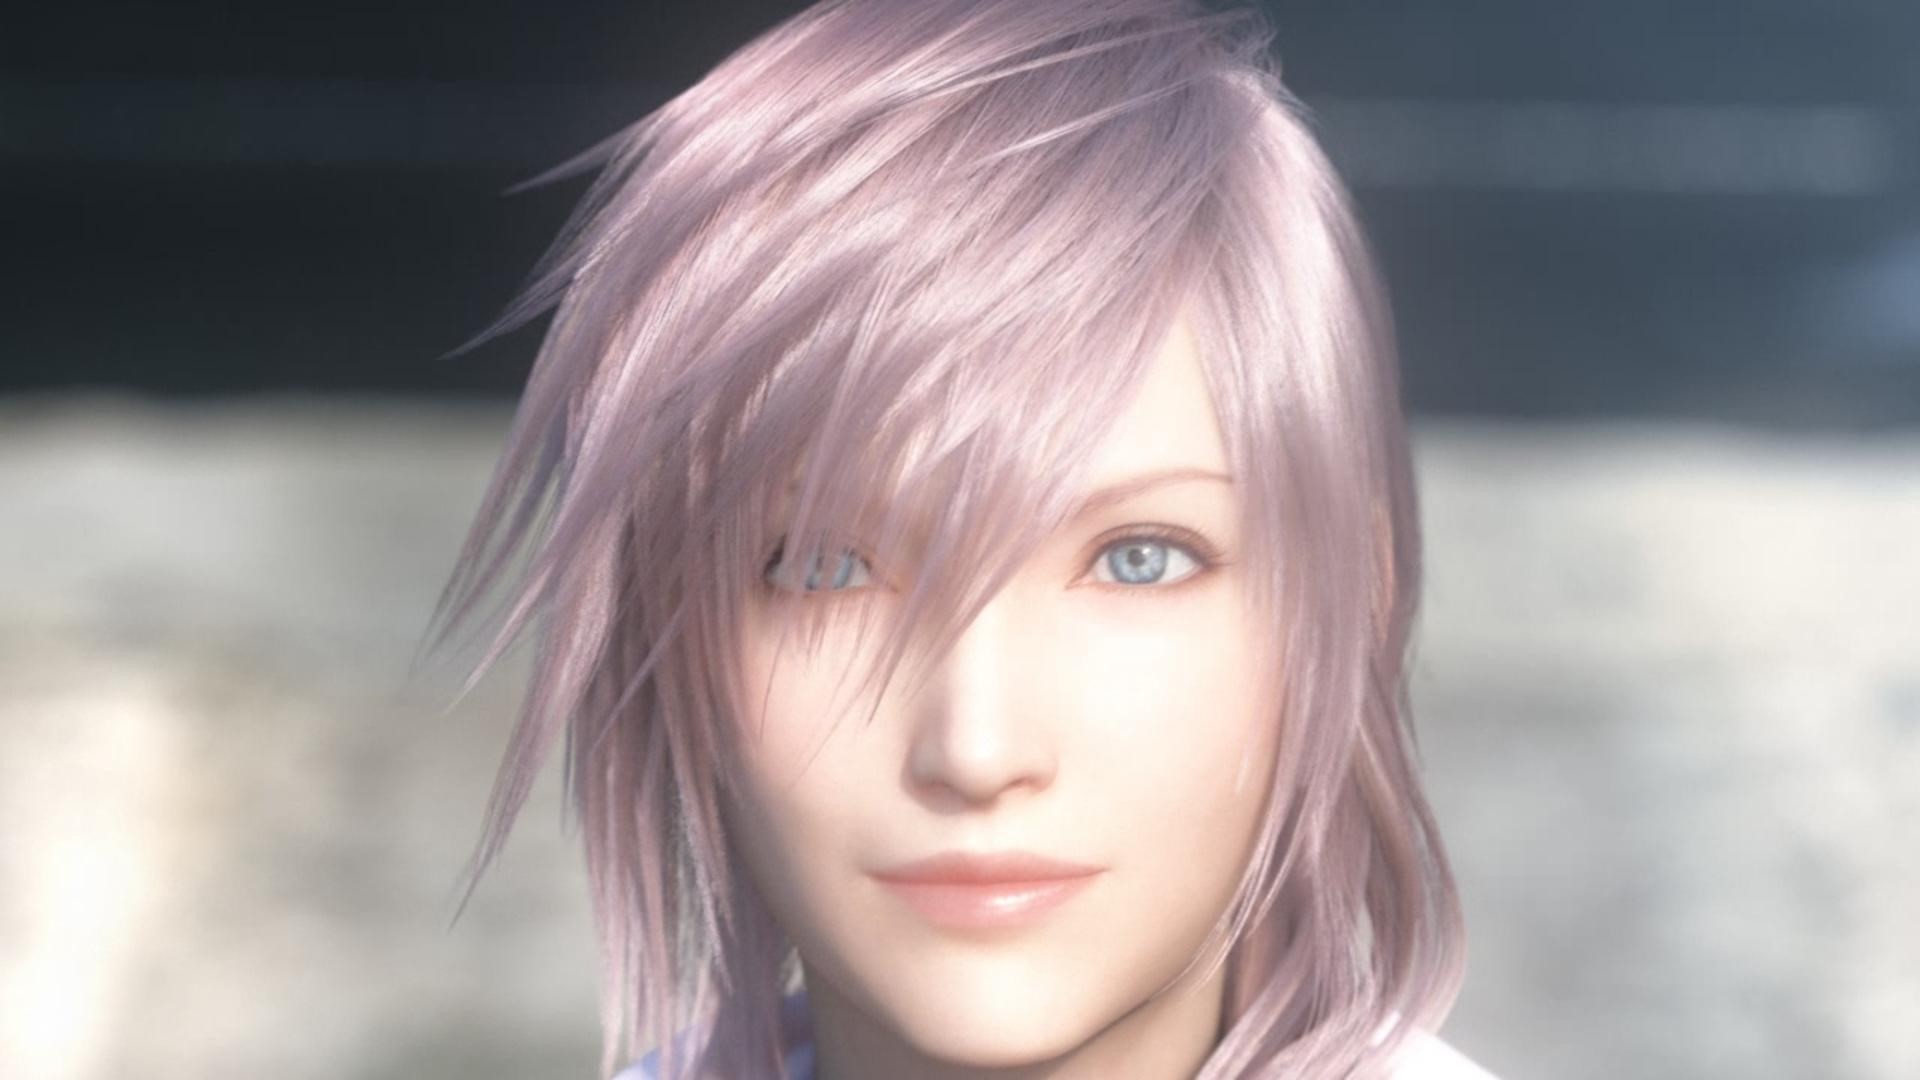 1920x1080 lightning returns final fantasy xiii wallpapers 1080p high quality, 147 kB  - Commodore Brian